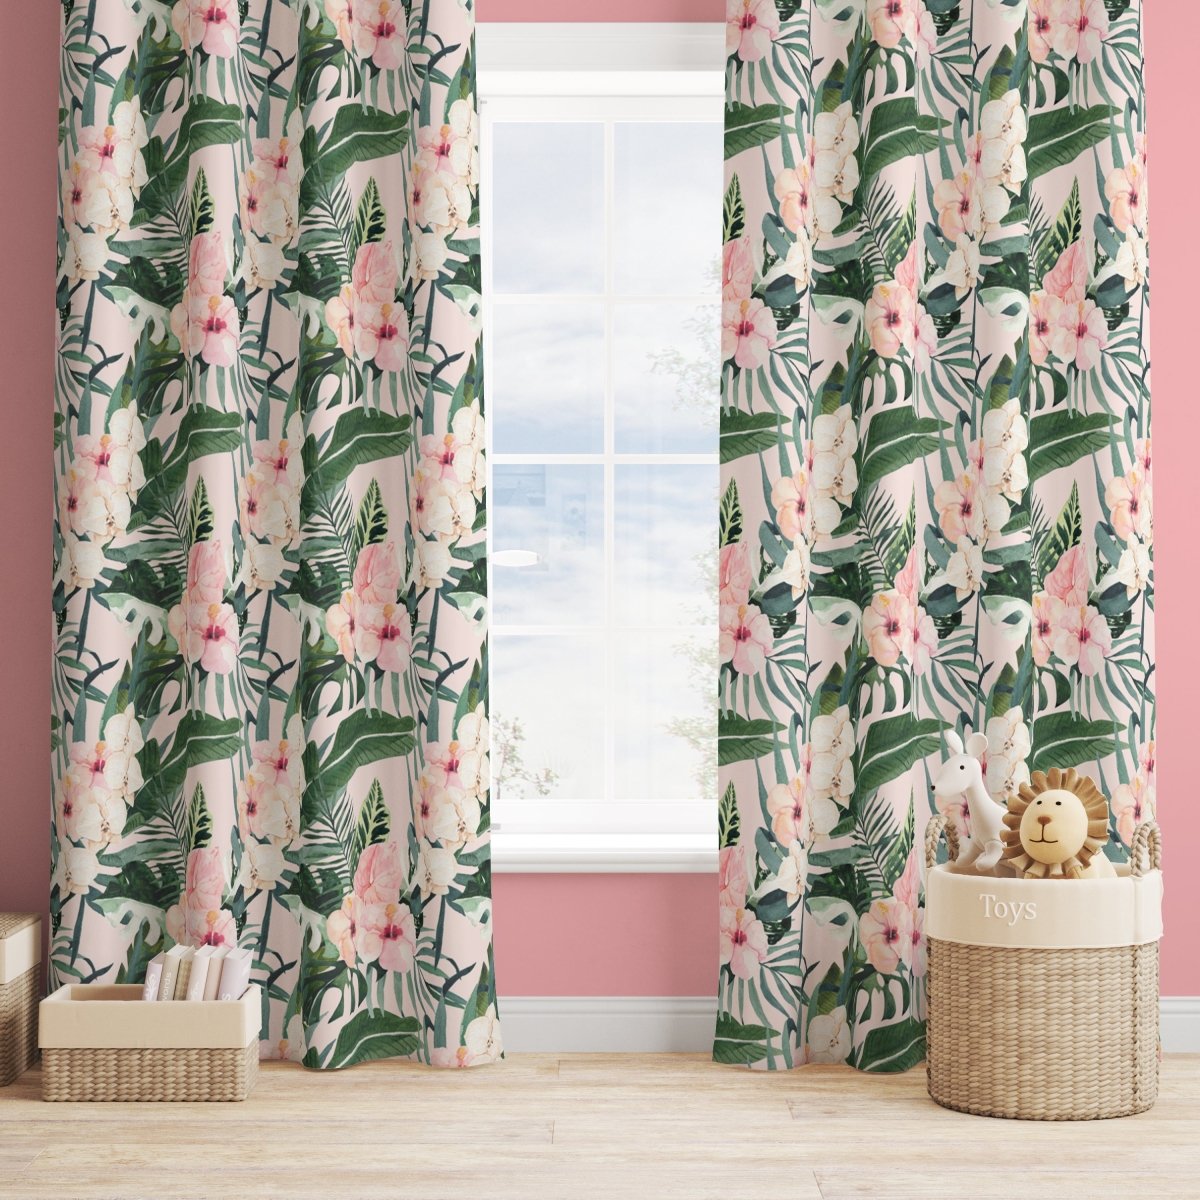 Tropical Floral Curtain Panel - gender_girl, Theme_Floral, Theme_Tropical